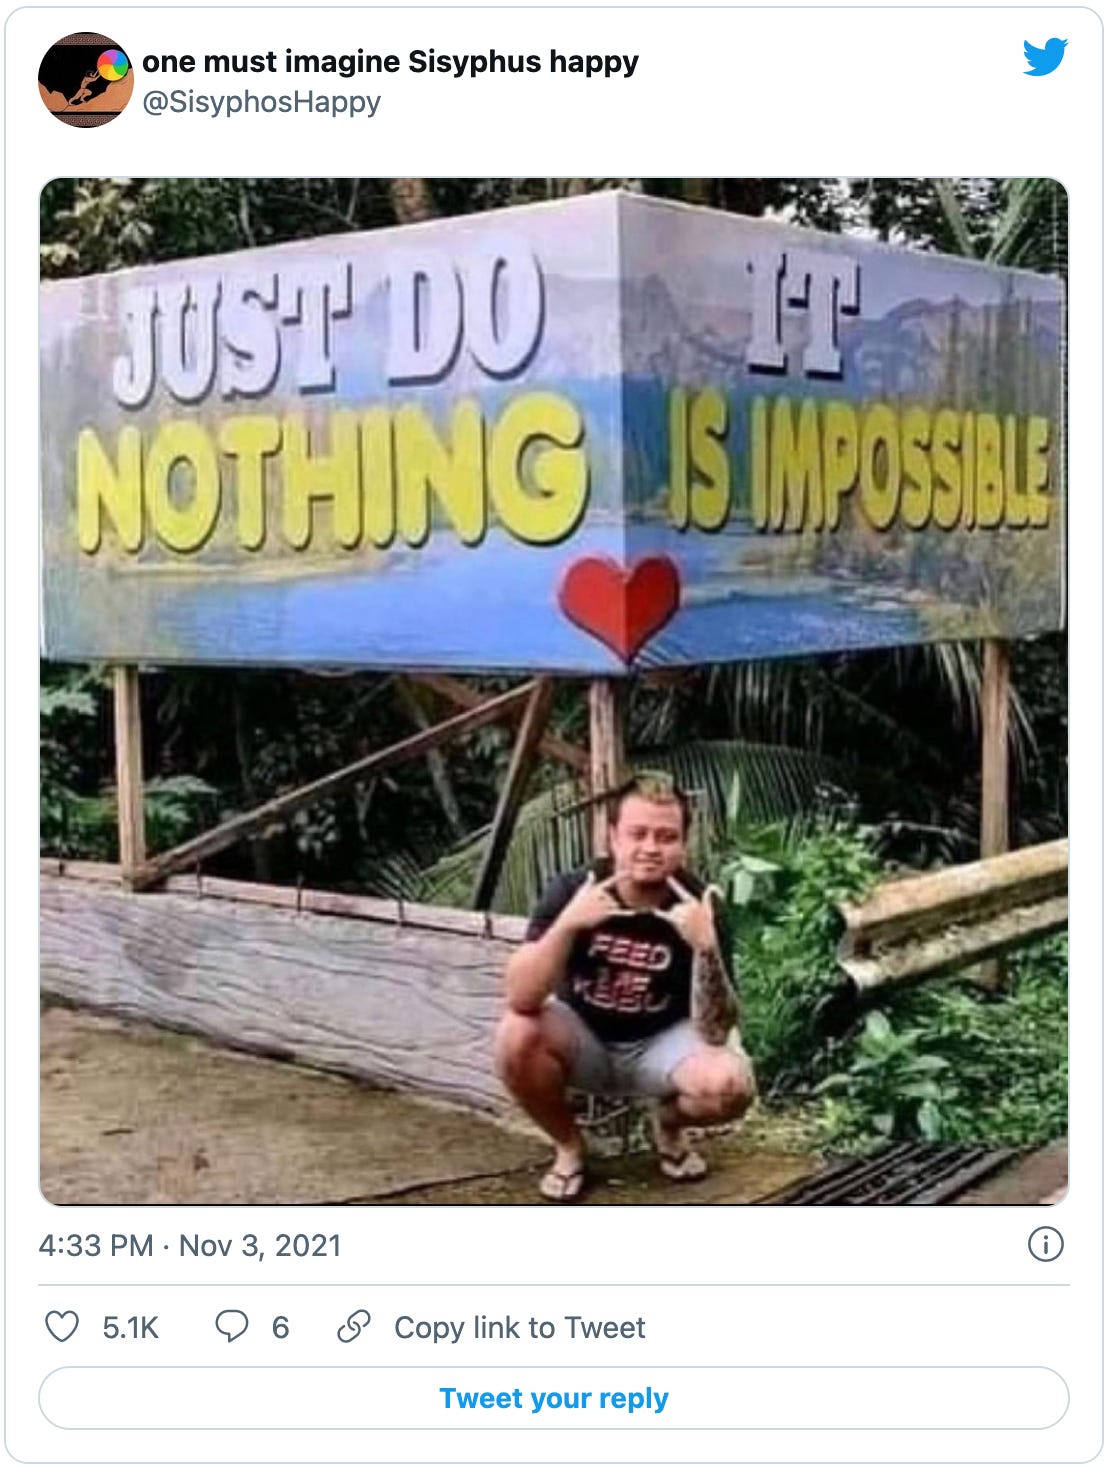 Tweet by @SisyphosHappy with an image of a big sign that appears to read “JUST DO NOTHING" / “IT IS IMPOSSIBLE”  